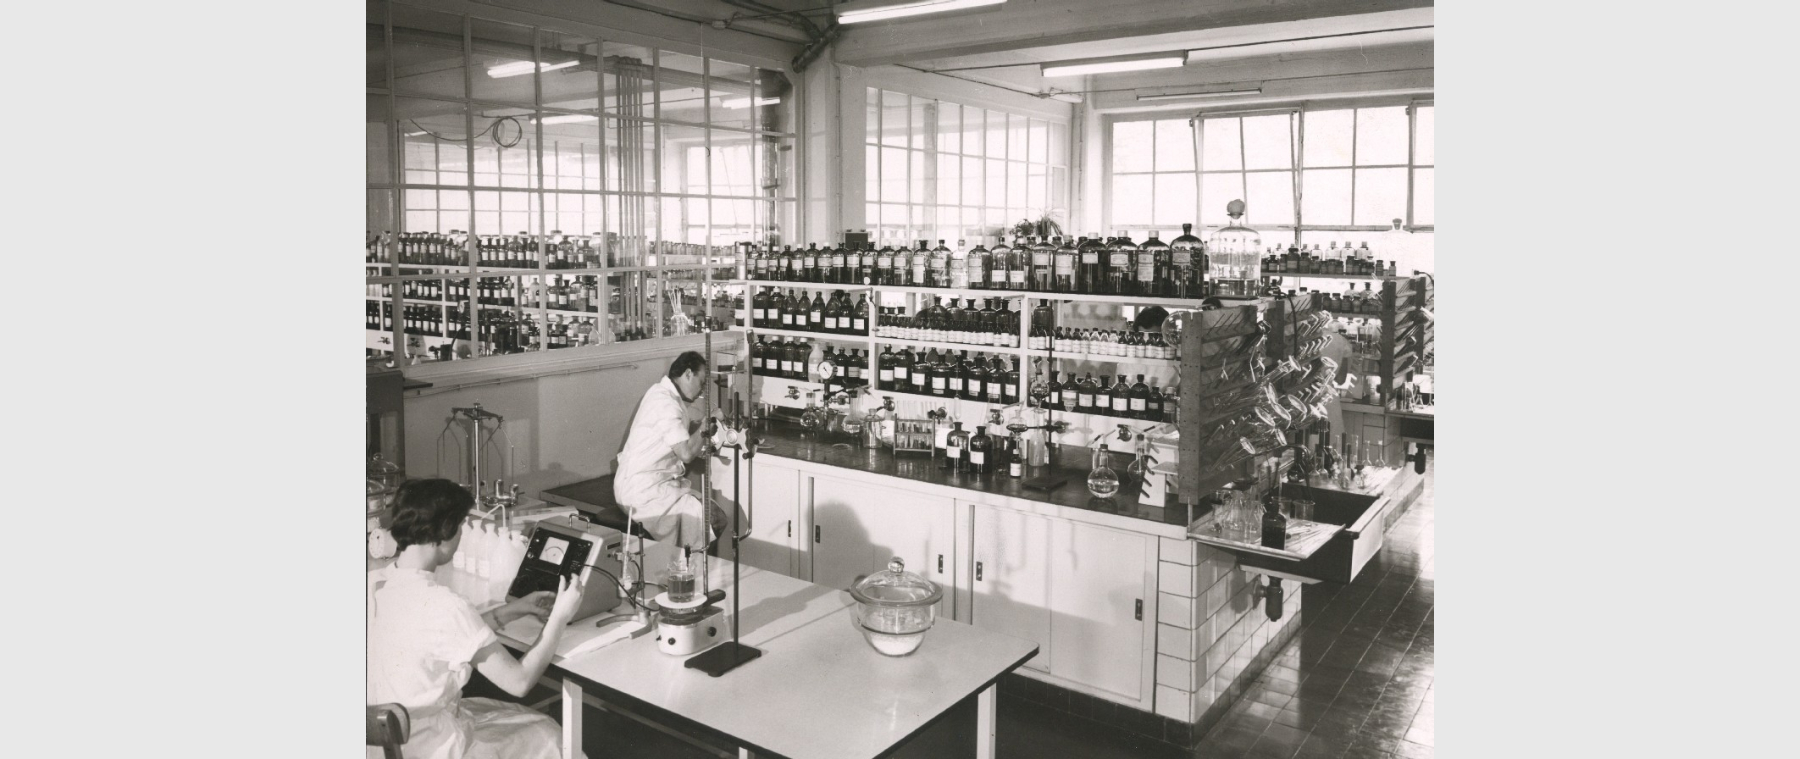 A Grünenthal research laboratory from 1965.